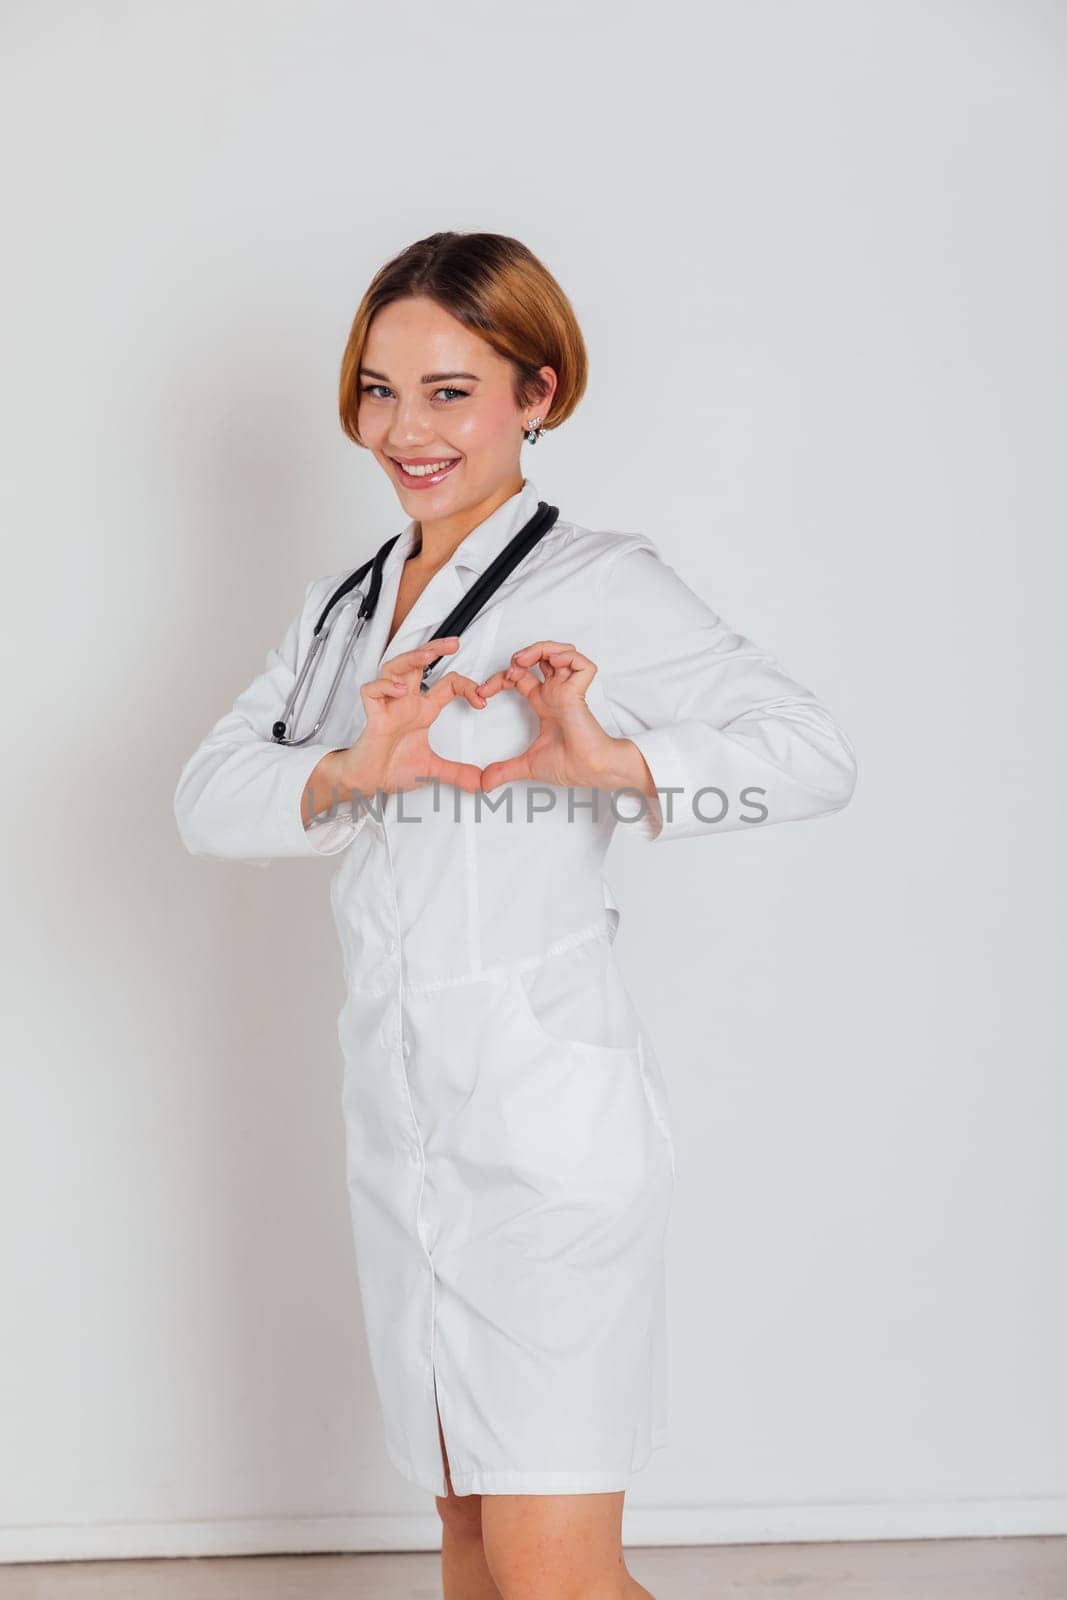 woman doctor in white coat with phonendoscope shows heart by Simakov